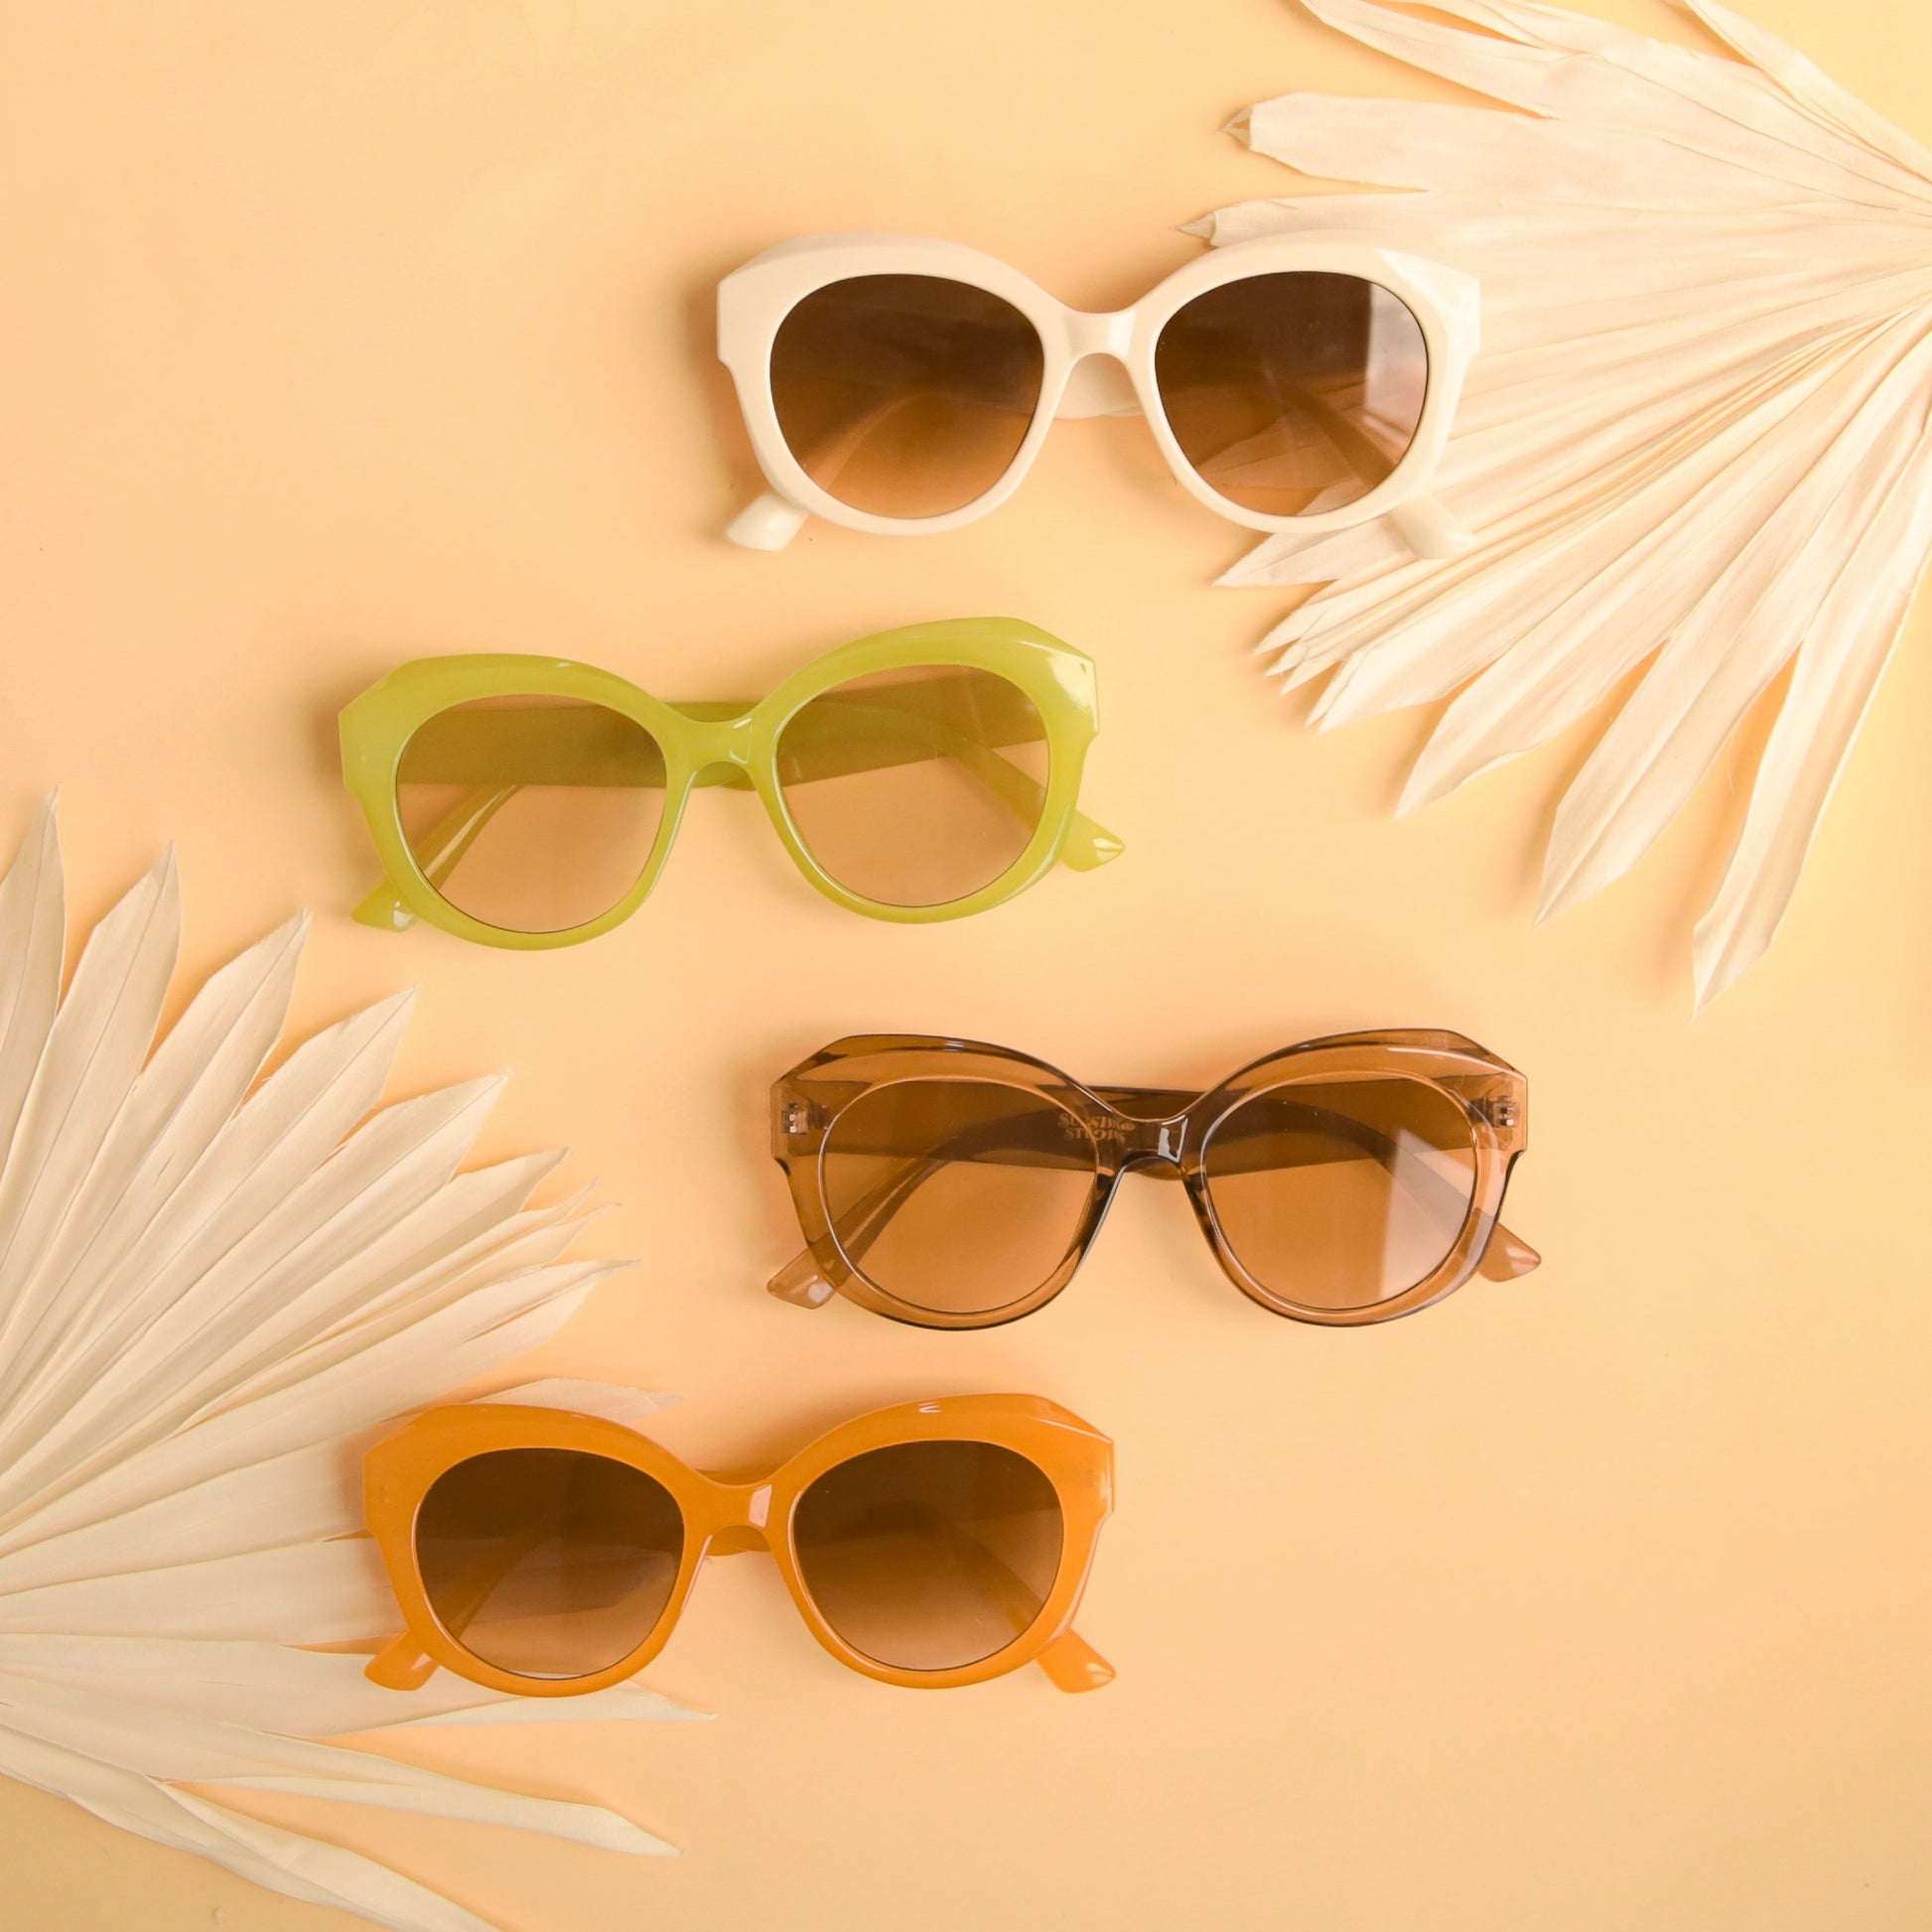 On a peachy background is a group photo of the different color options that the Donna Sunglasses come in. There is a white pair, a green, a light brown and an orange.